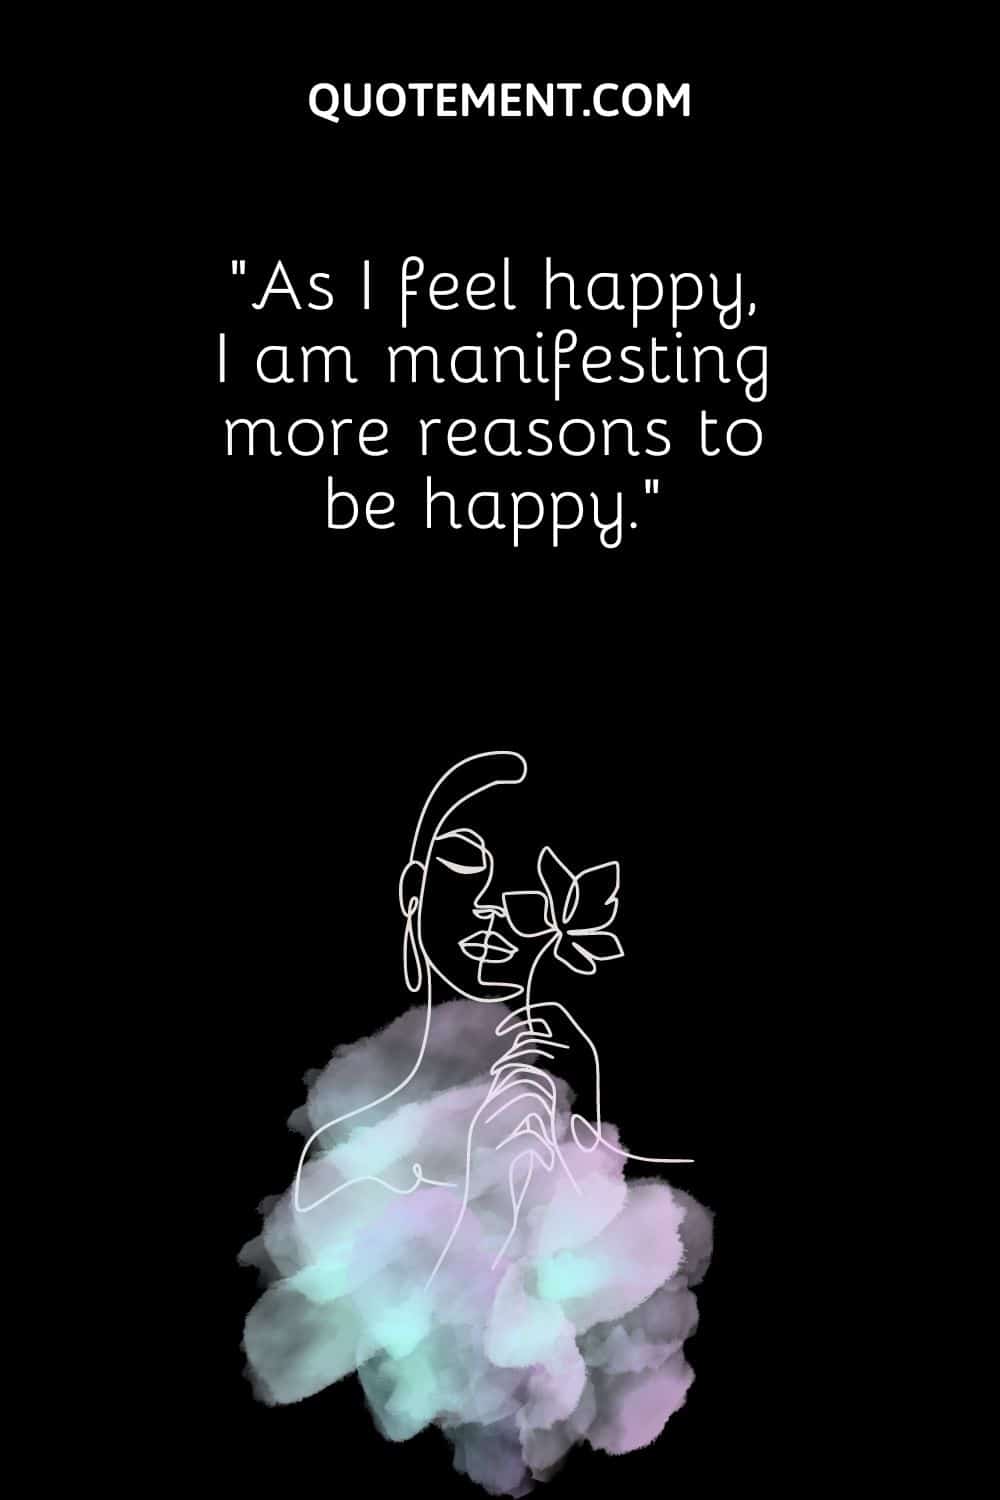 As I feel happy, I am manifesting more reasons to be happy